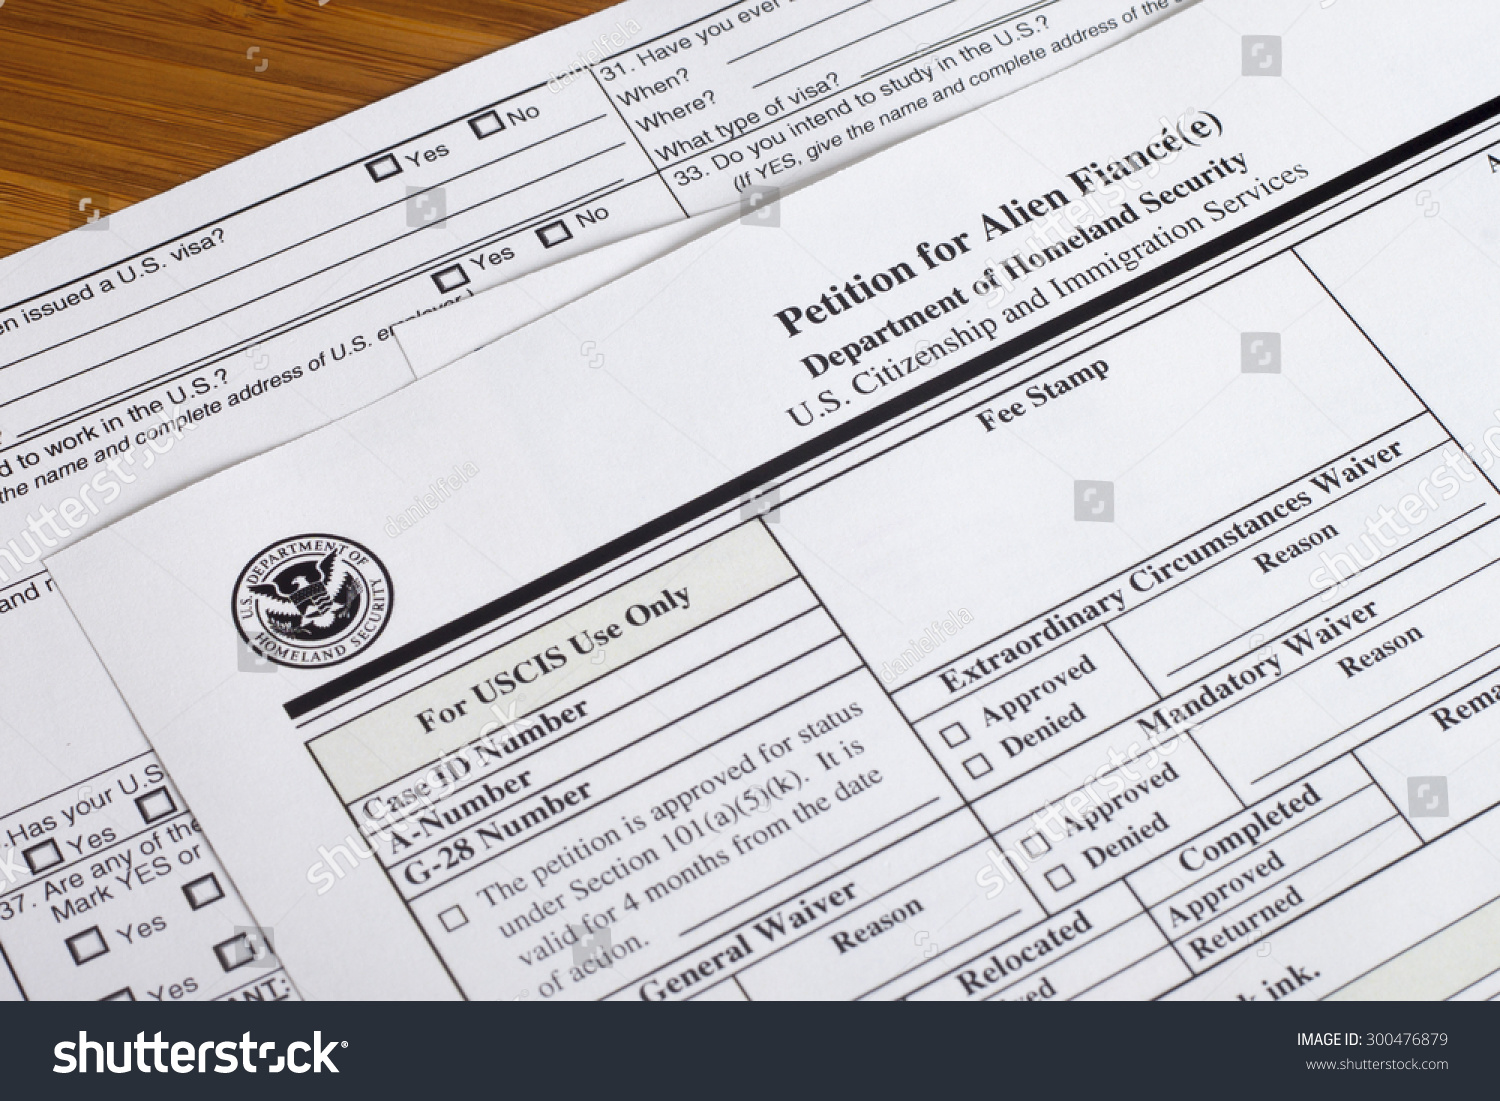 Us Homeland Security Citizen Immigration Services Stock Photo 300476879